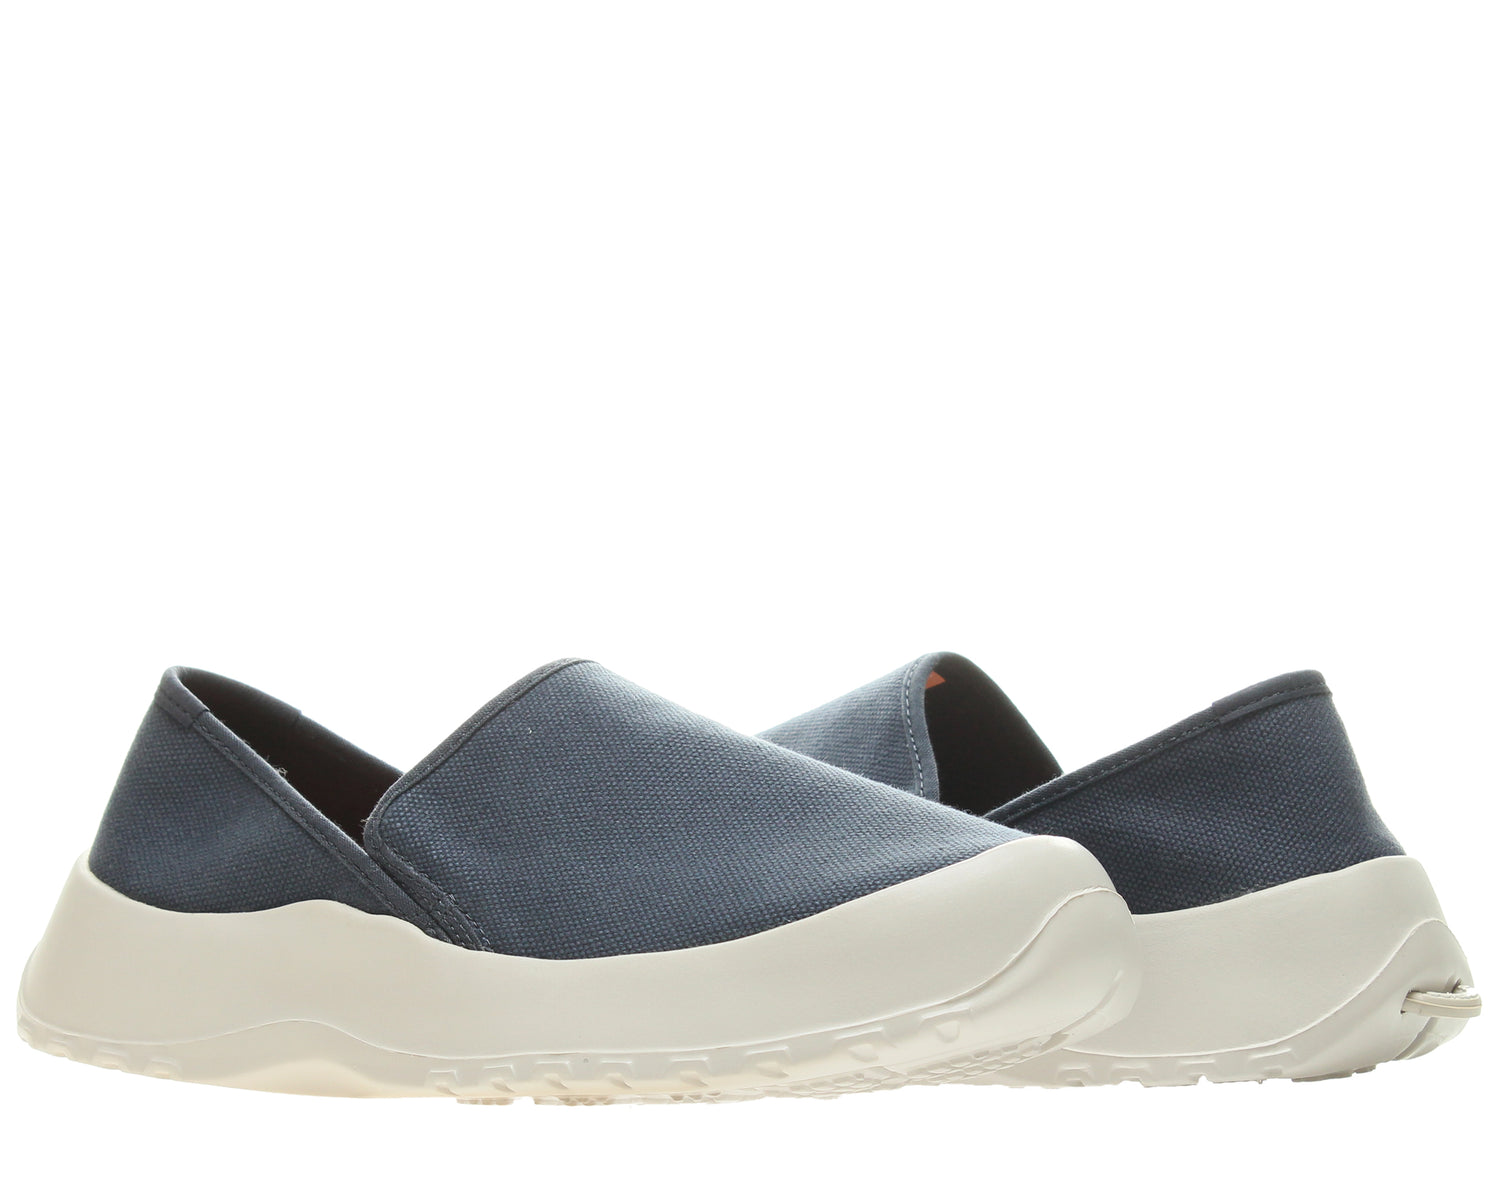 SoftScience Drift Canvas Slip-on Shoes